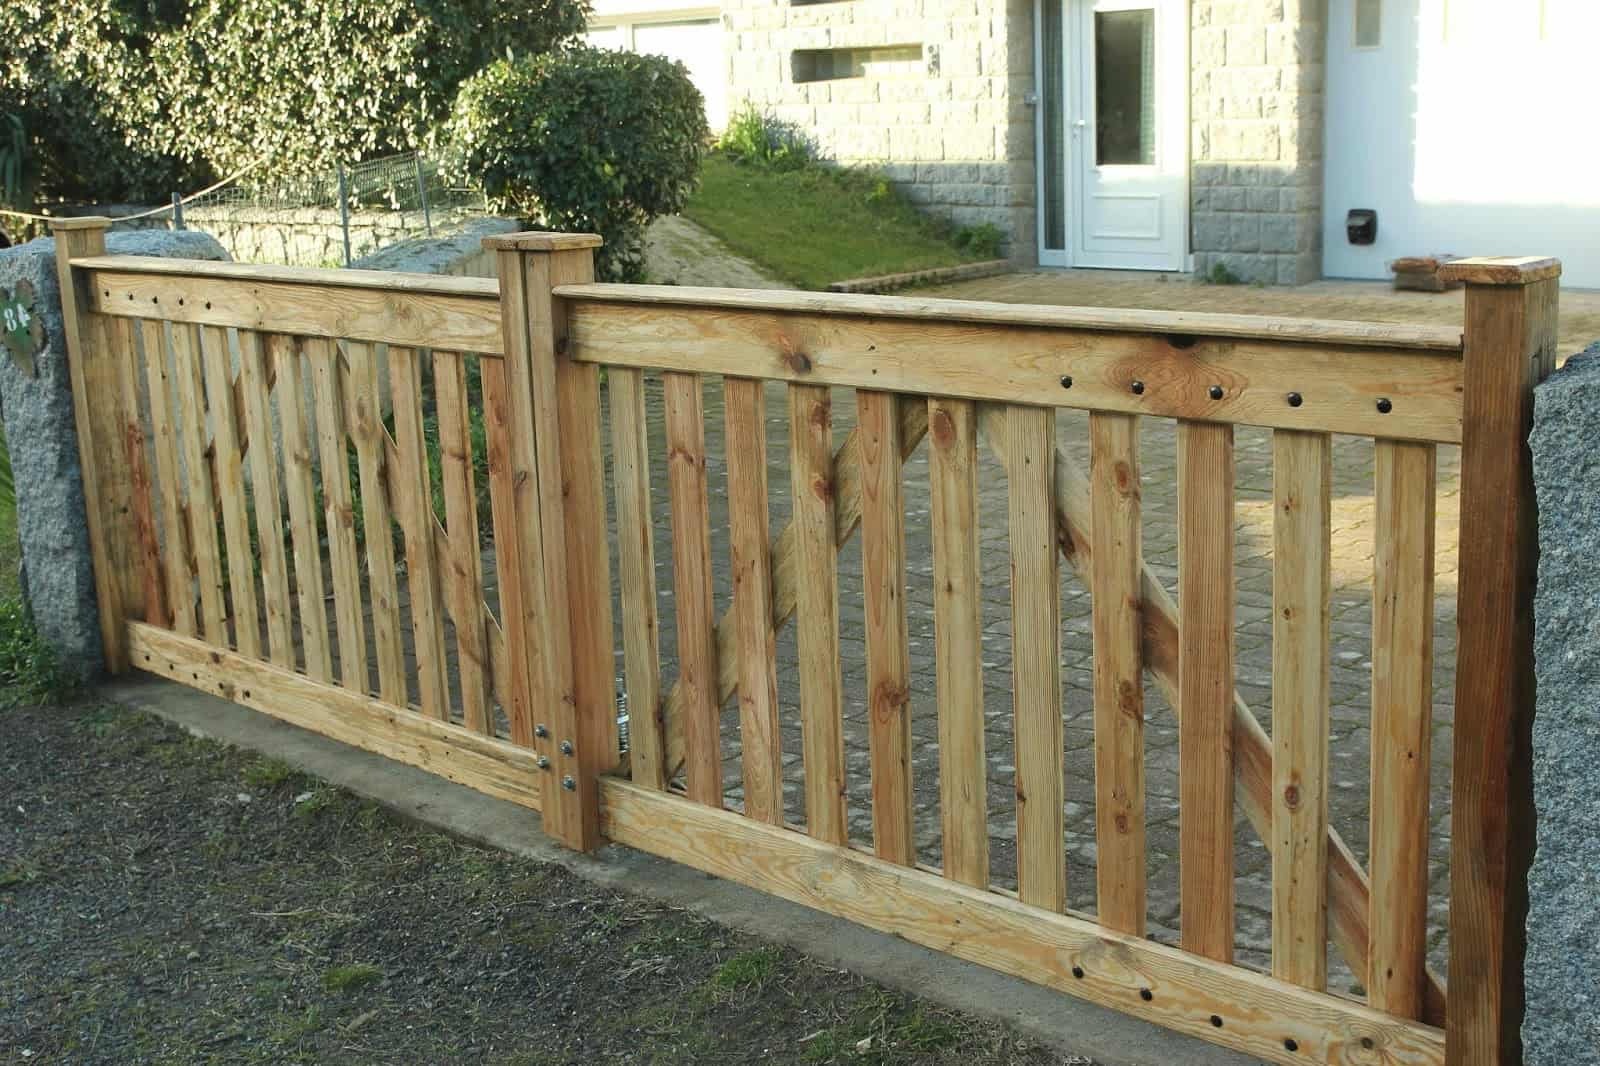 DIY Driveway Gate: Step-by-Step Guide to Building Your Own | Twigandthistle